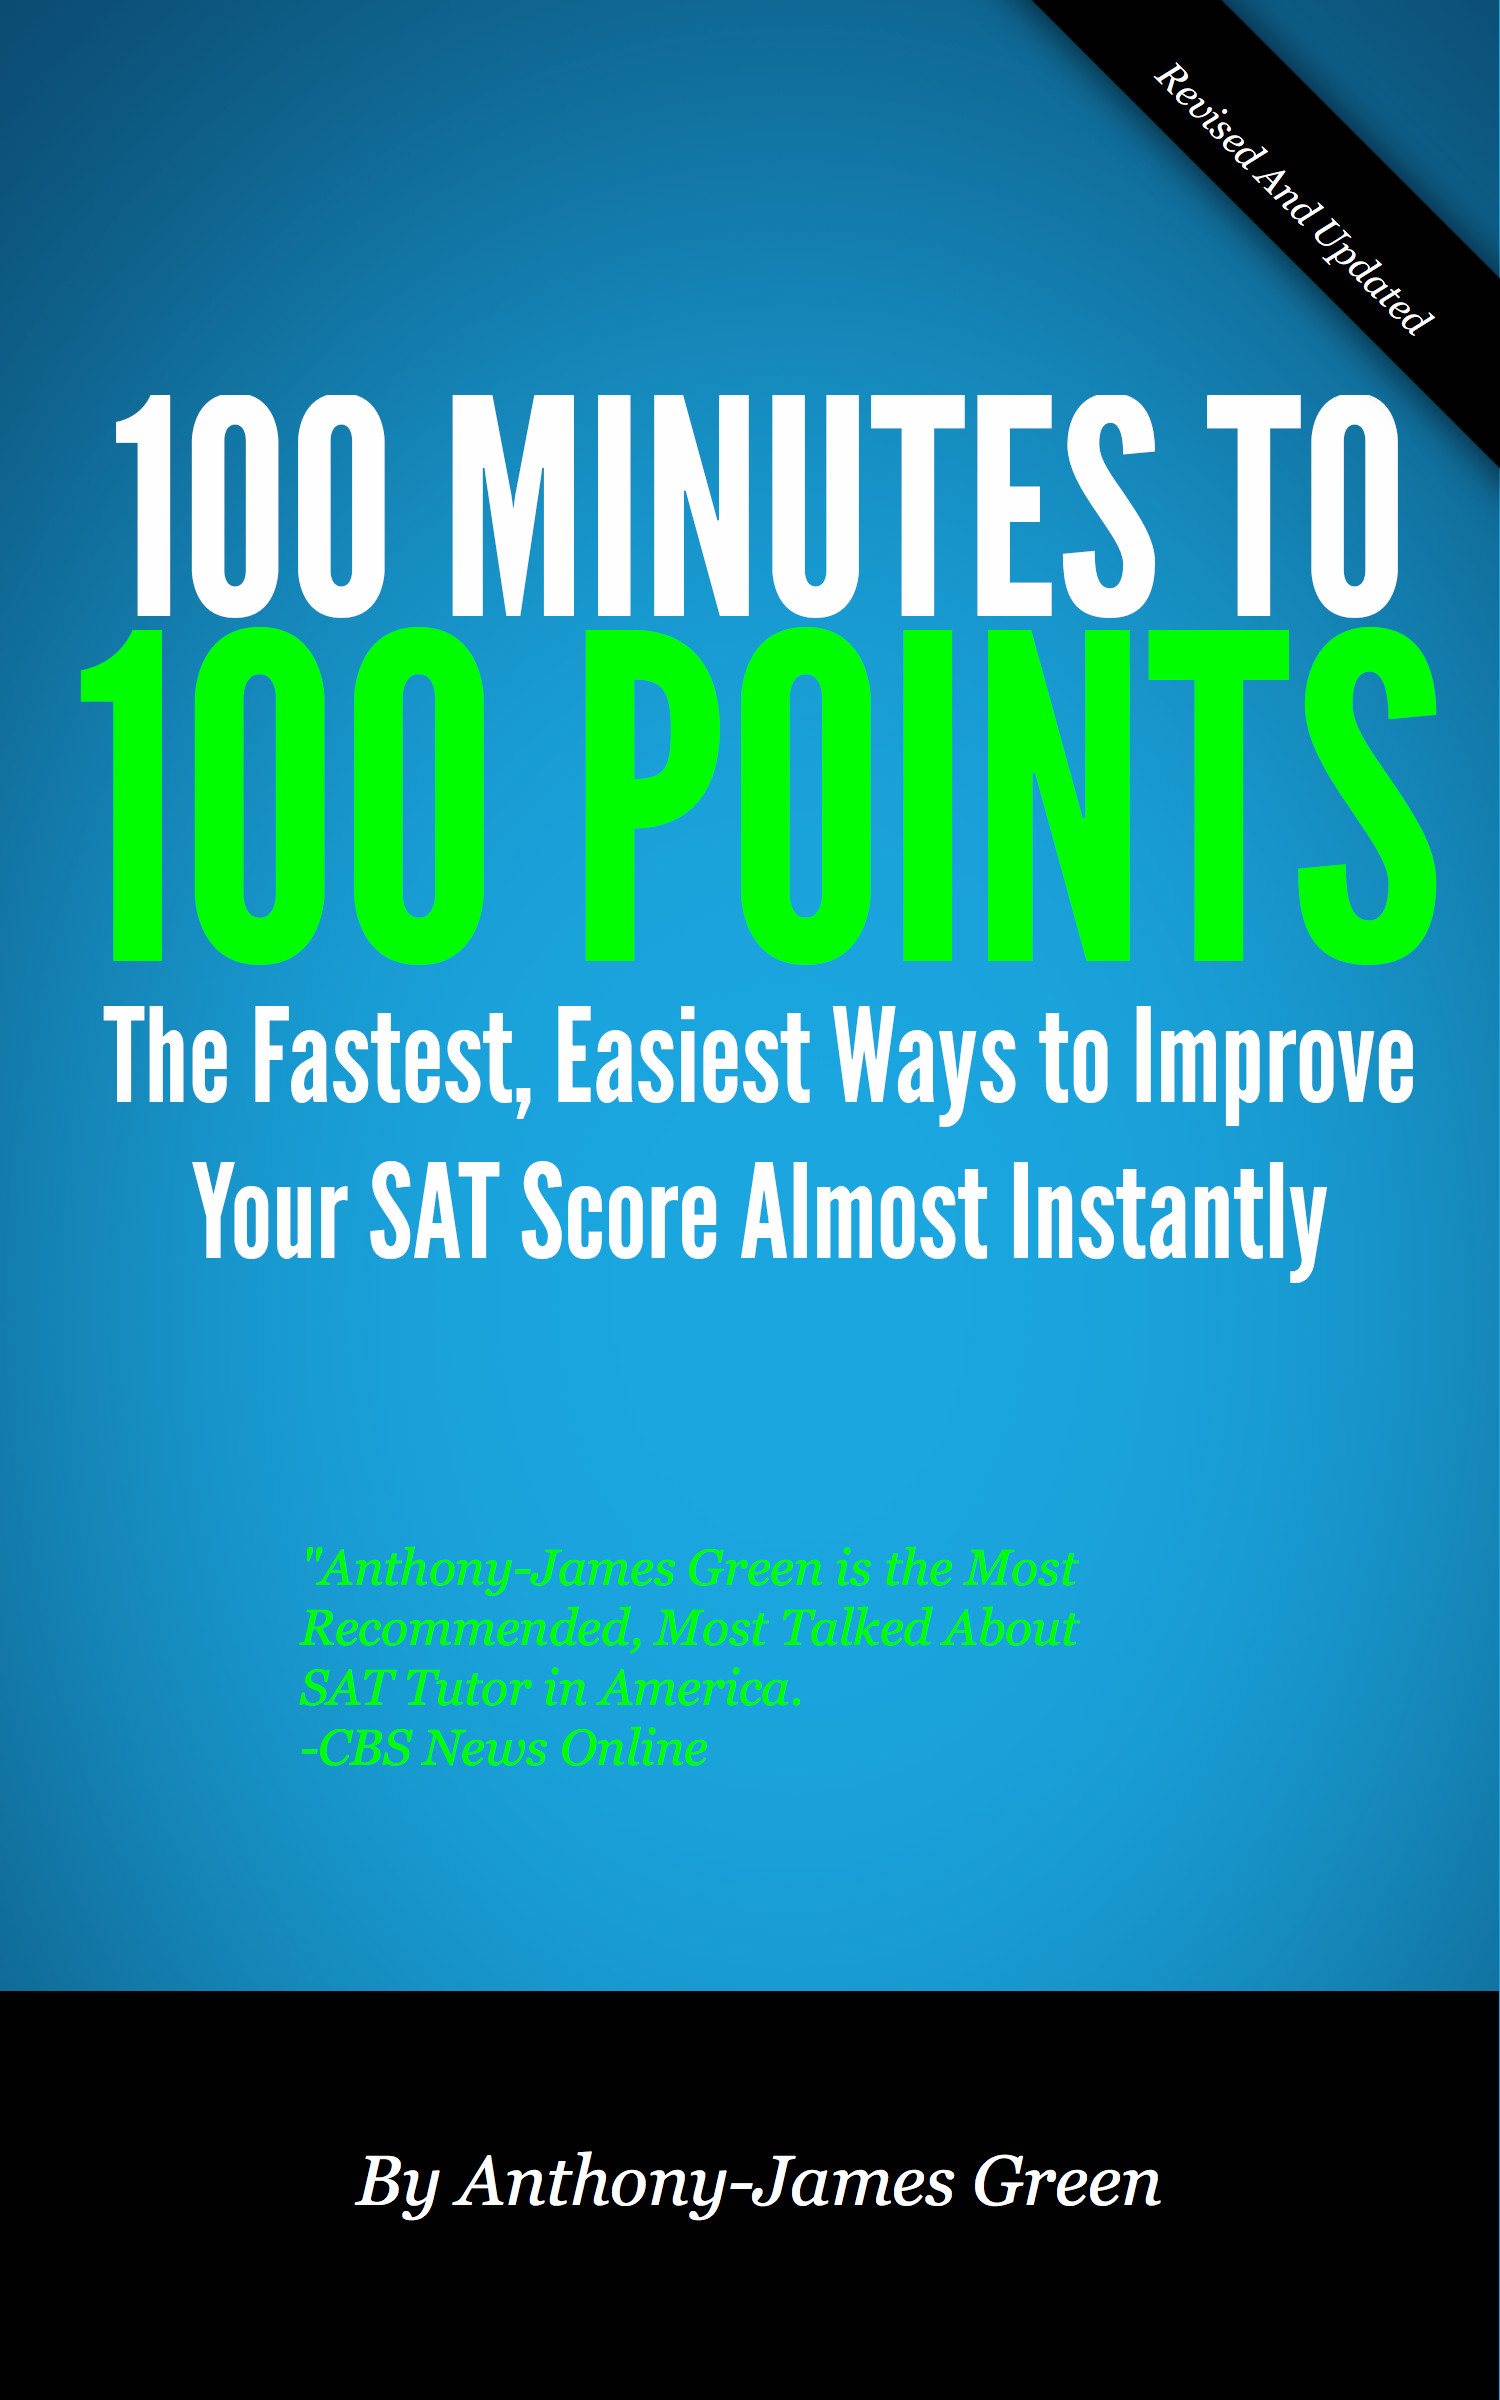 SAT Prep Guide 100 Minutes to 100 Points